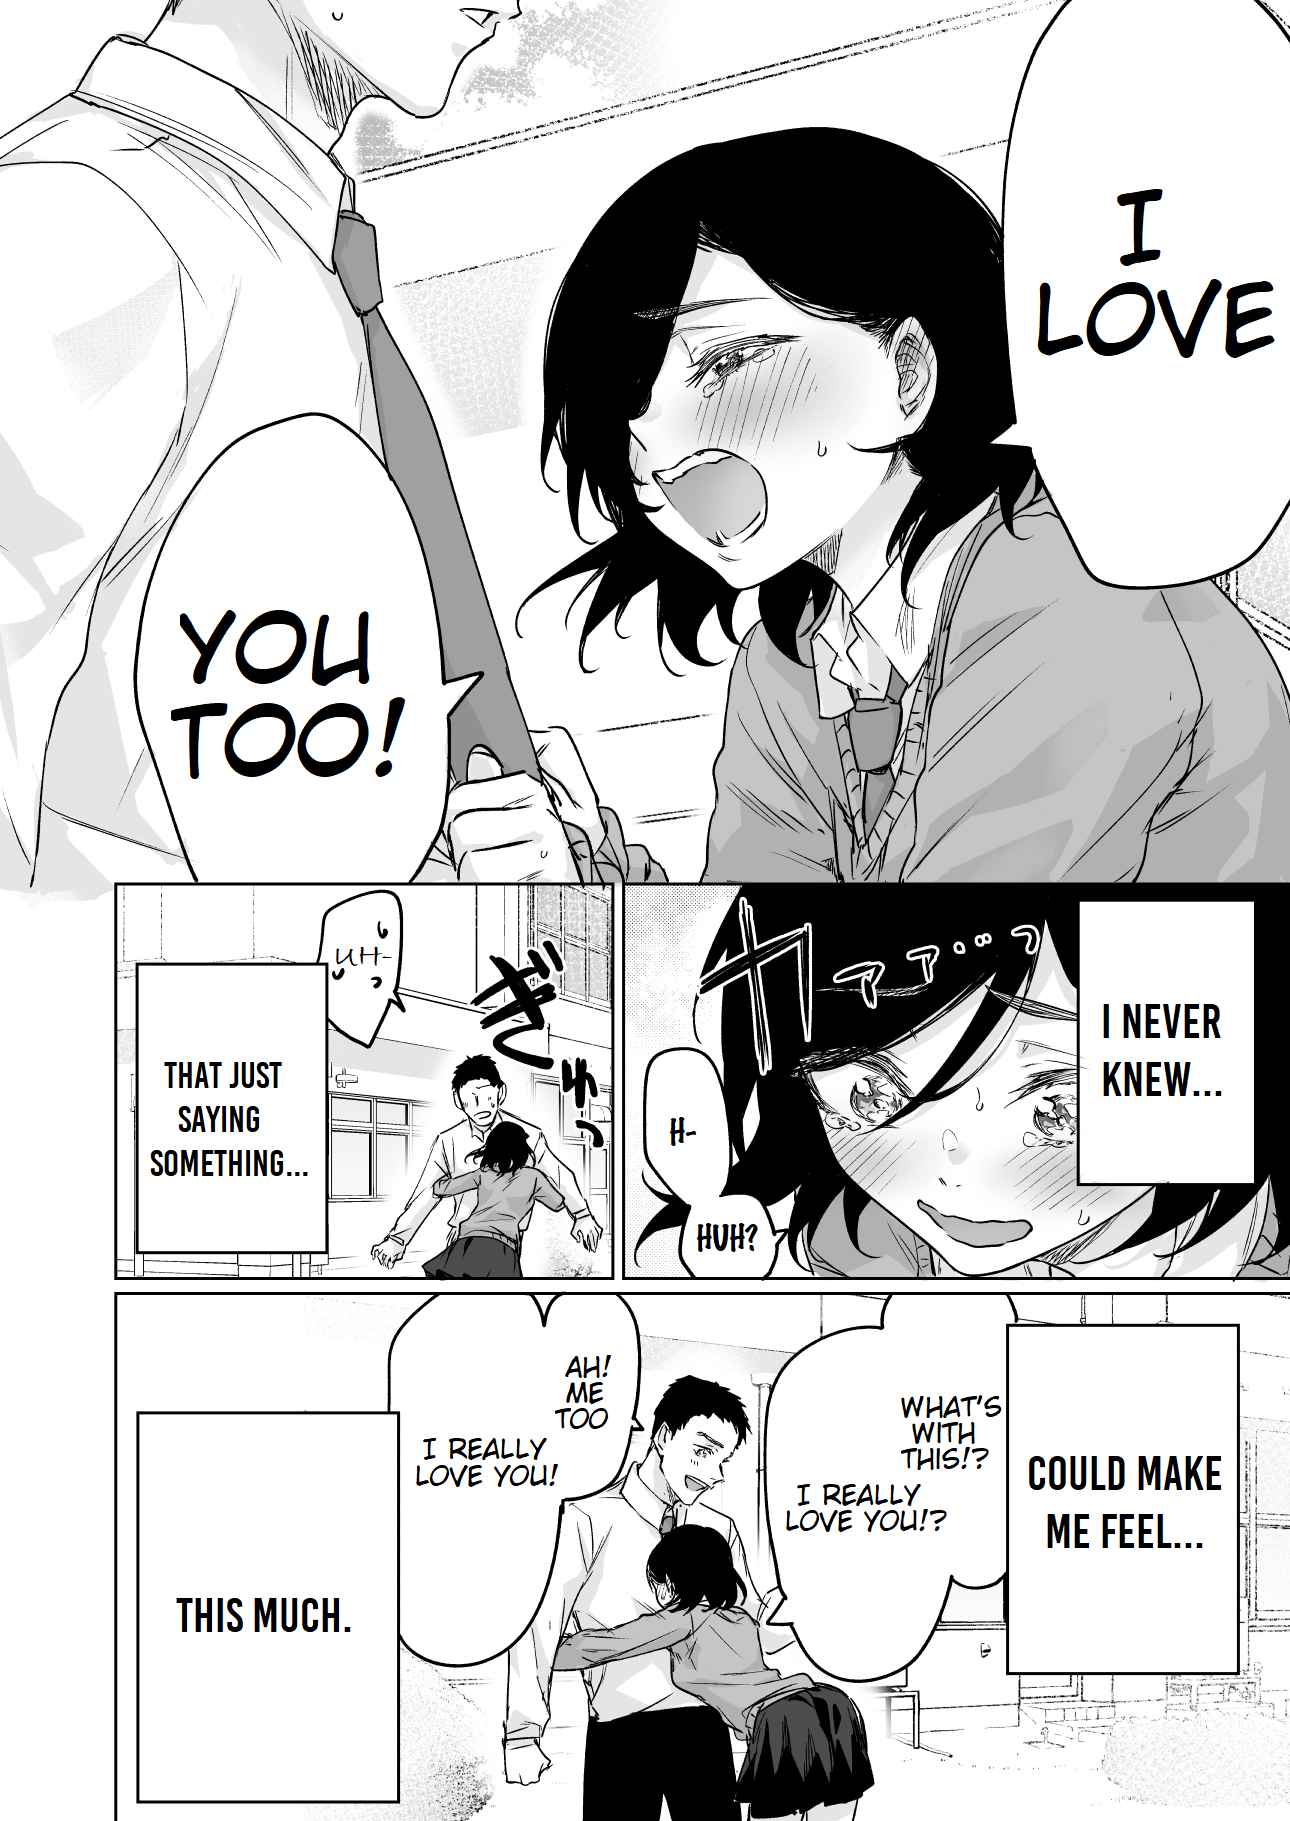 Confession Series Ch. 8 if you keep saying "I love you" then..